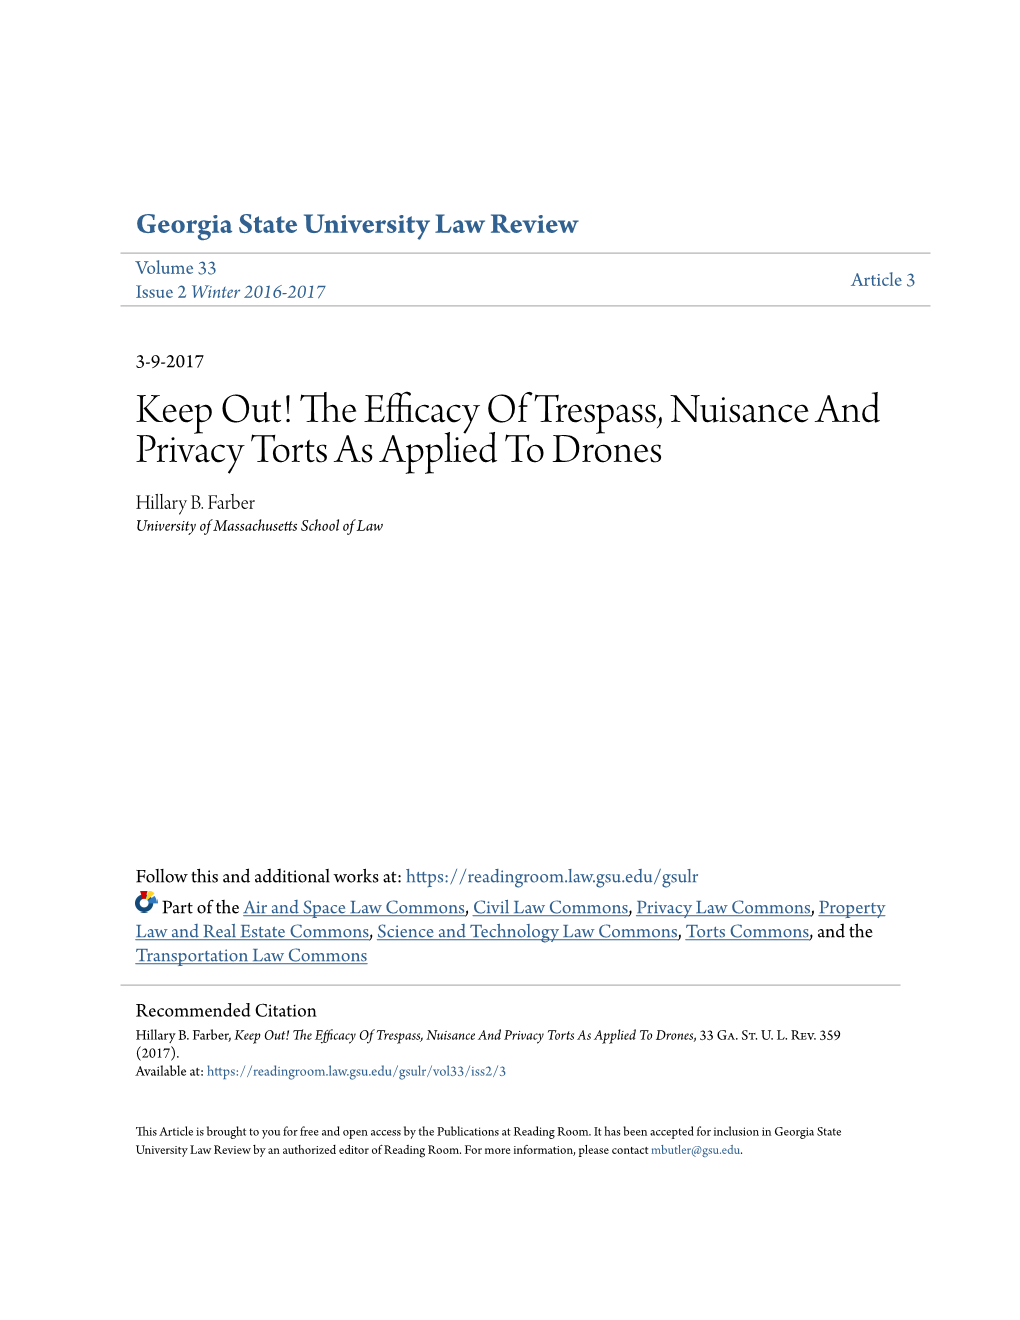 Keep Out! the Efficacy of Trespass, Nuisance and Privacy Torts As Applied to Drones, 33 Ga